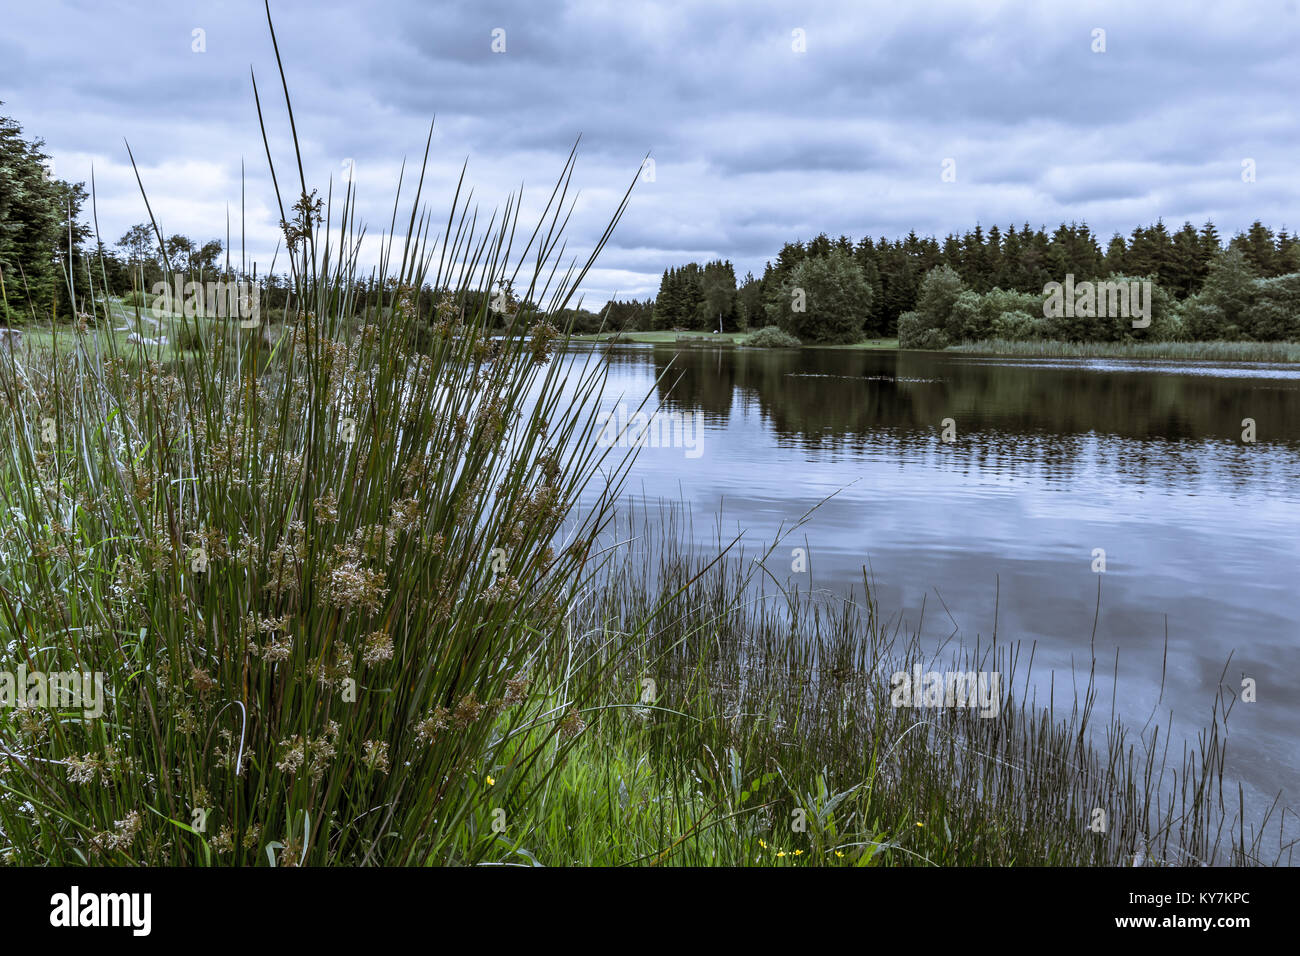 Trees and grass reflections in the water of a tranquil lake, Silkeborg, Denmark, June 21, 2017 Stock Photo